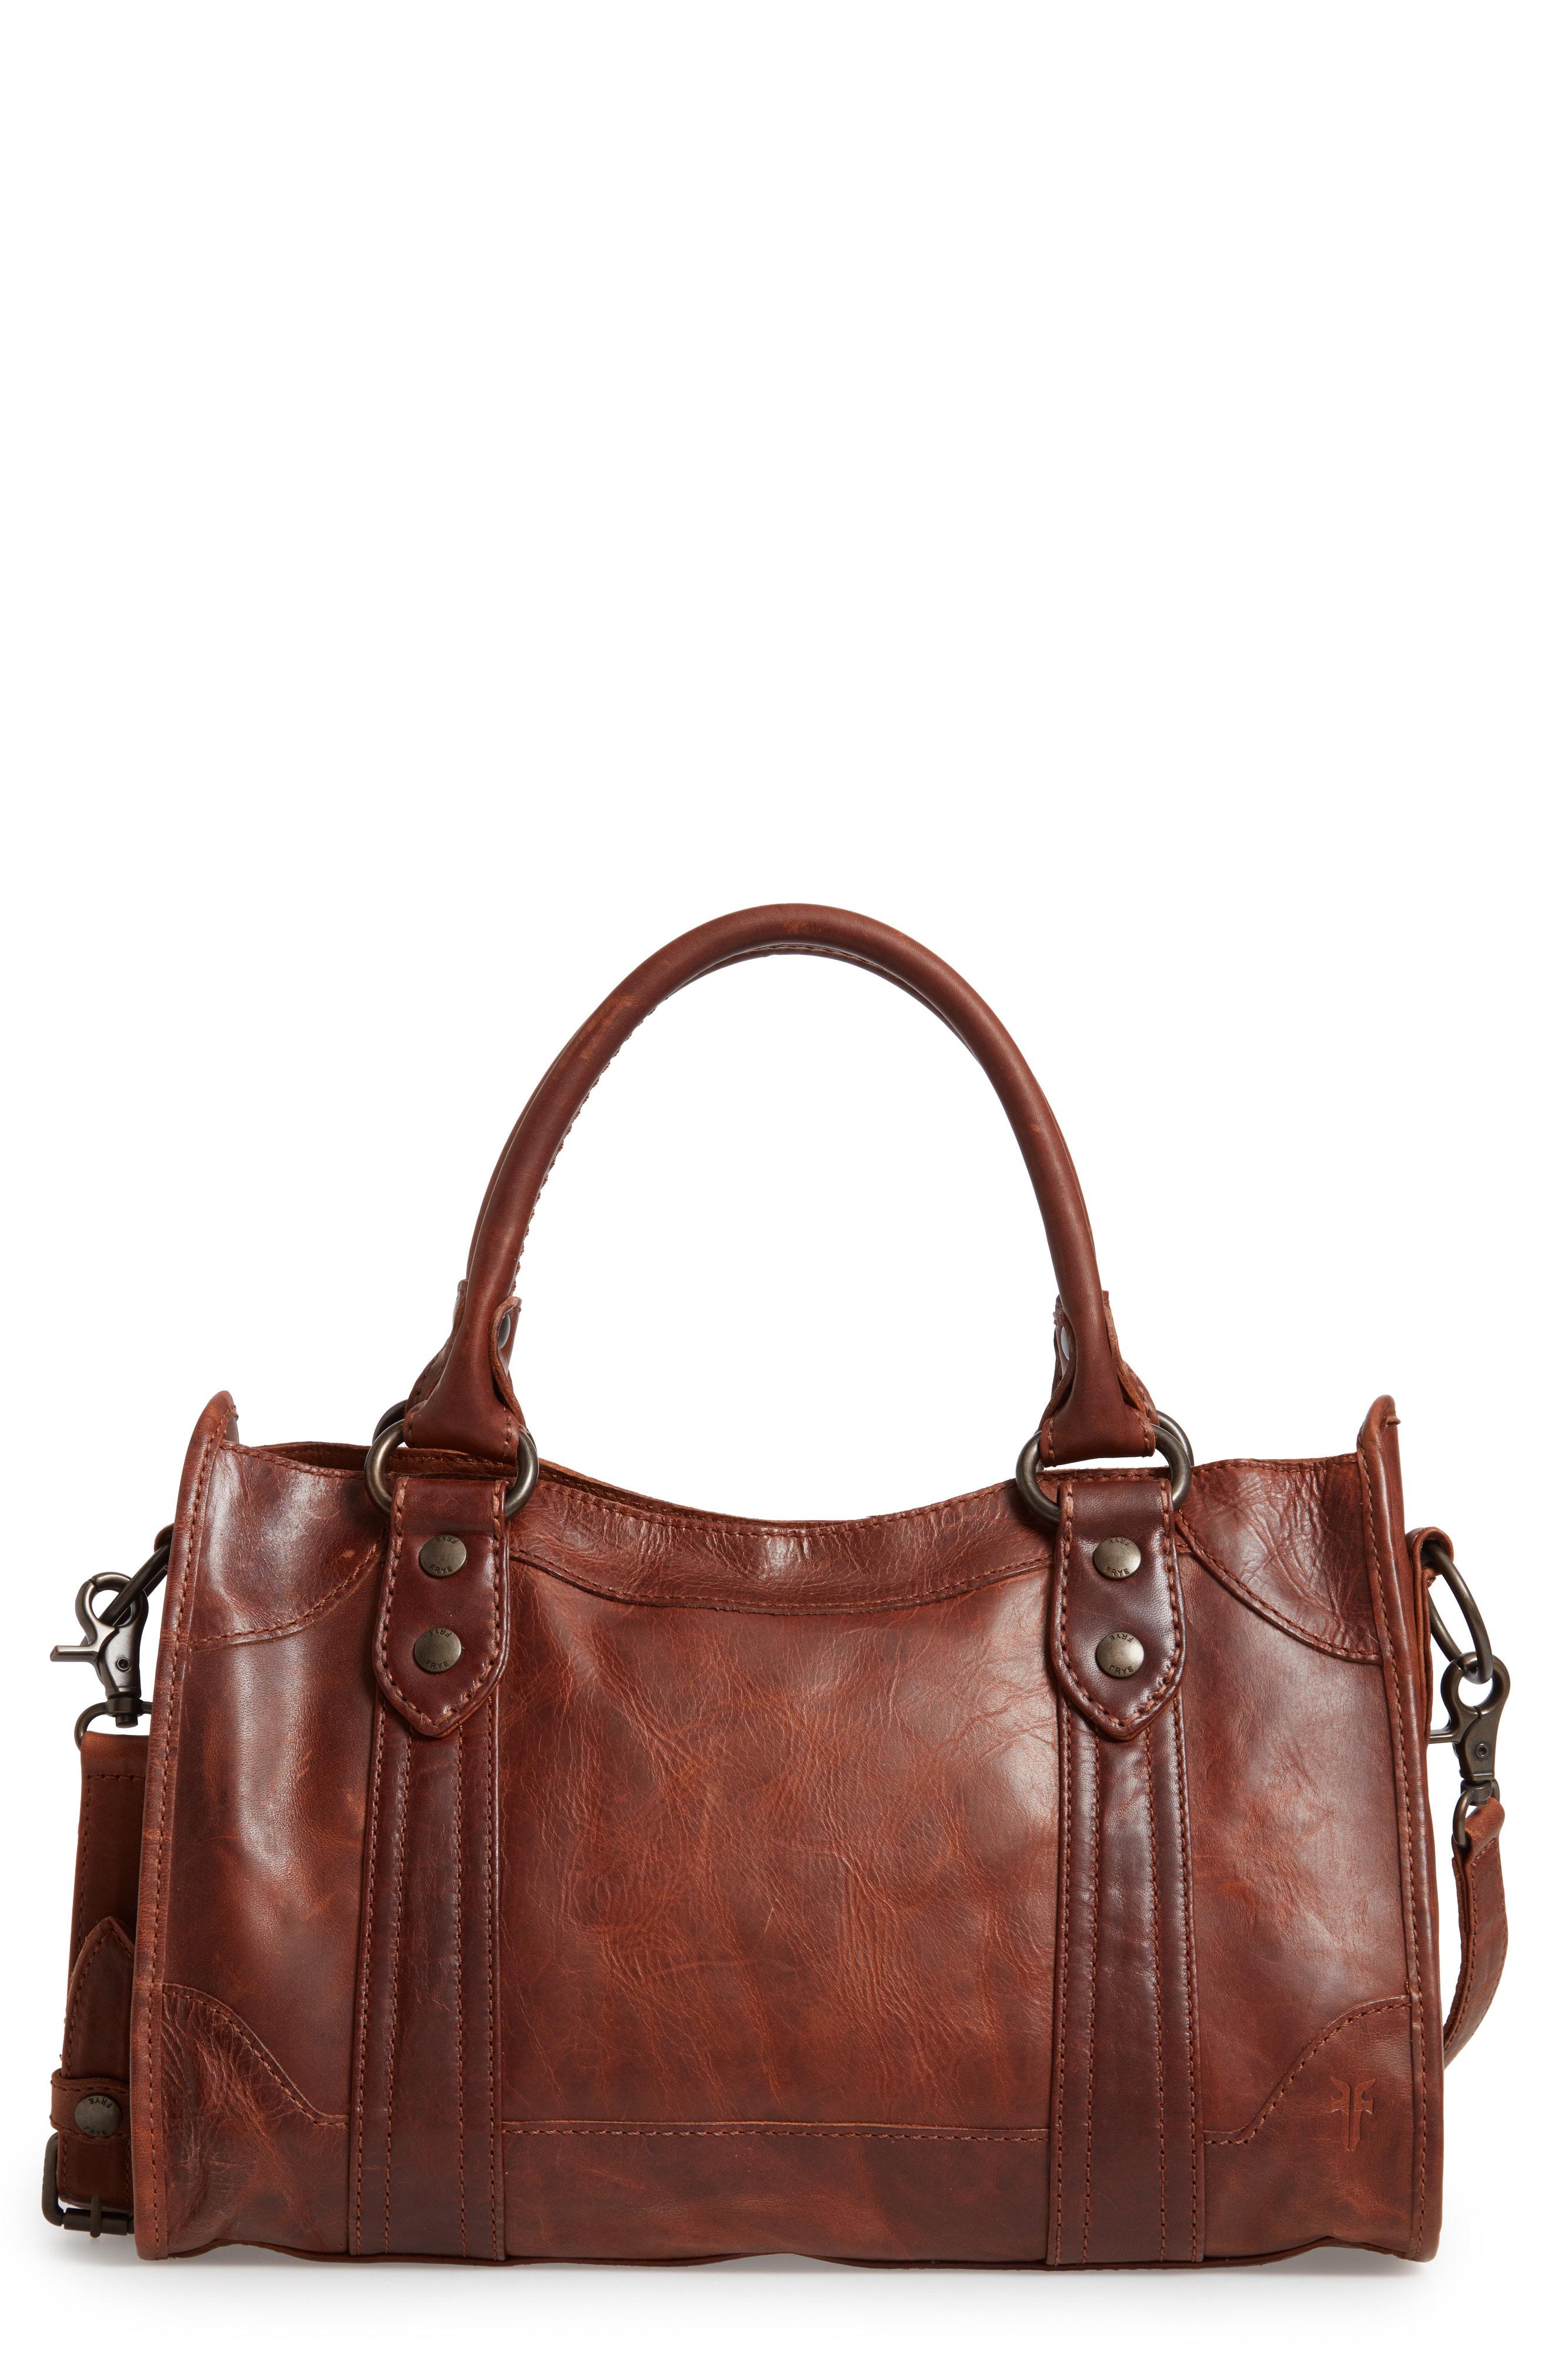 Lyst - Frye 'melissa' Washed Leather Satchel in Brown